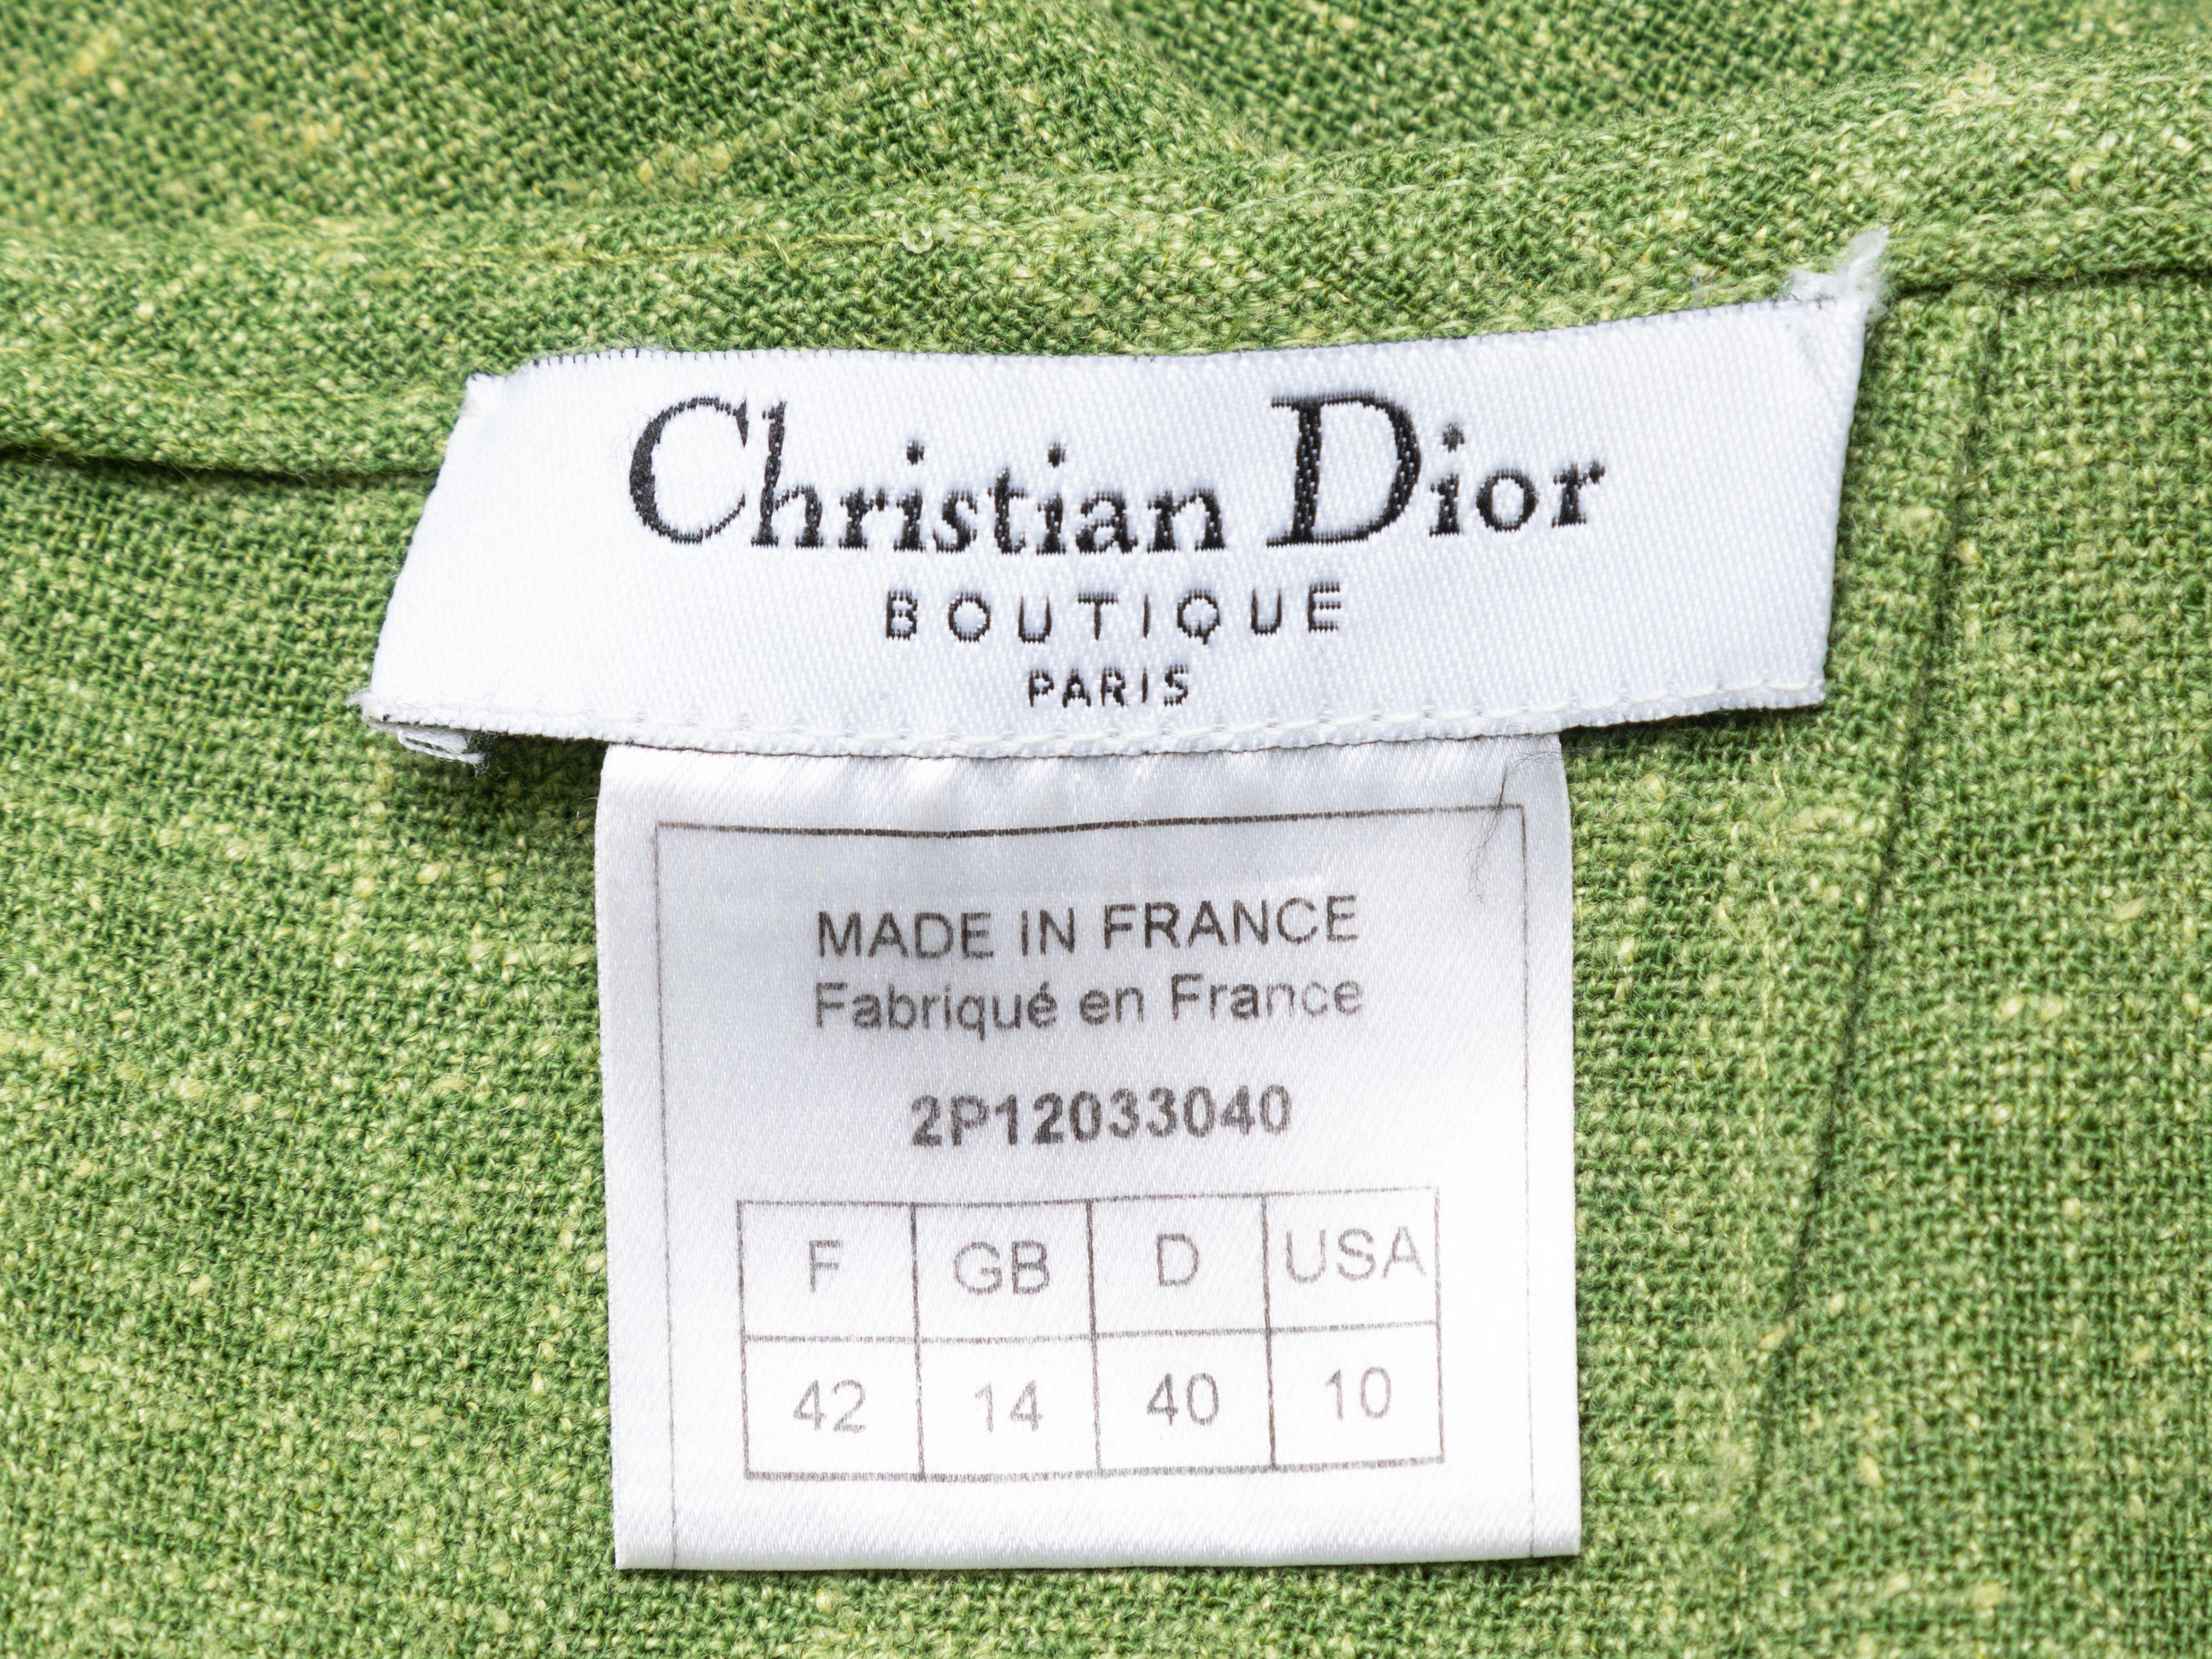 Product Details: Vintage green linen and tan leather knee-length skirt by Christian Dior. Dual patch pockets at front. Vent at front hem. Zip closure at center back. 28